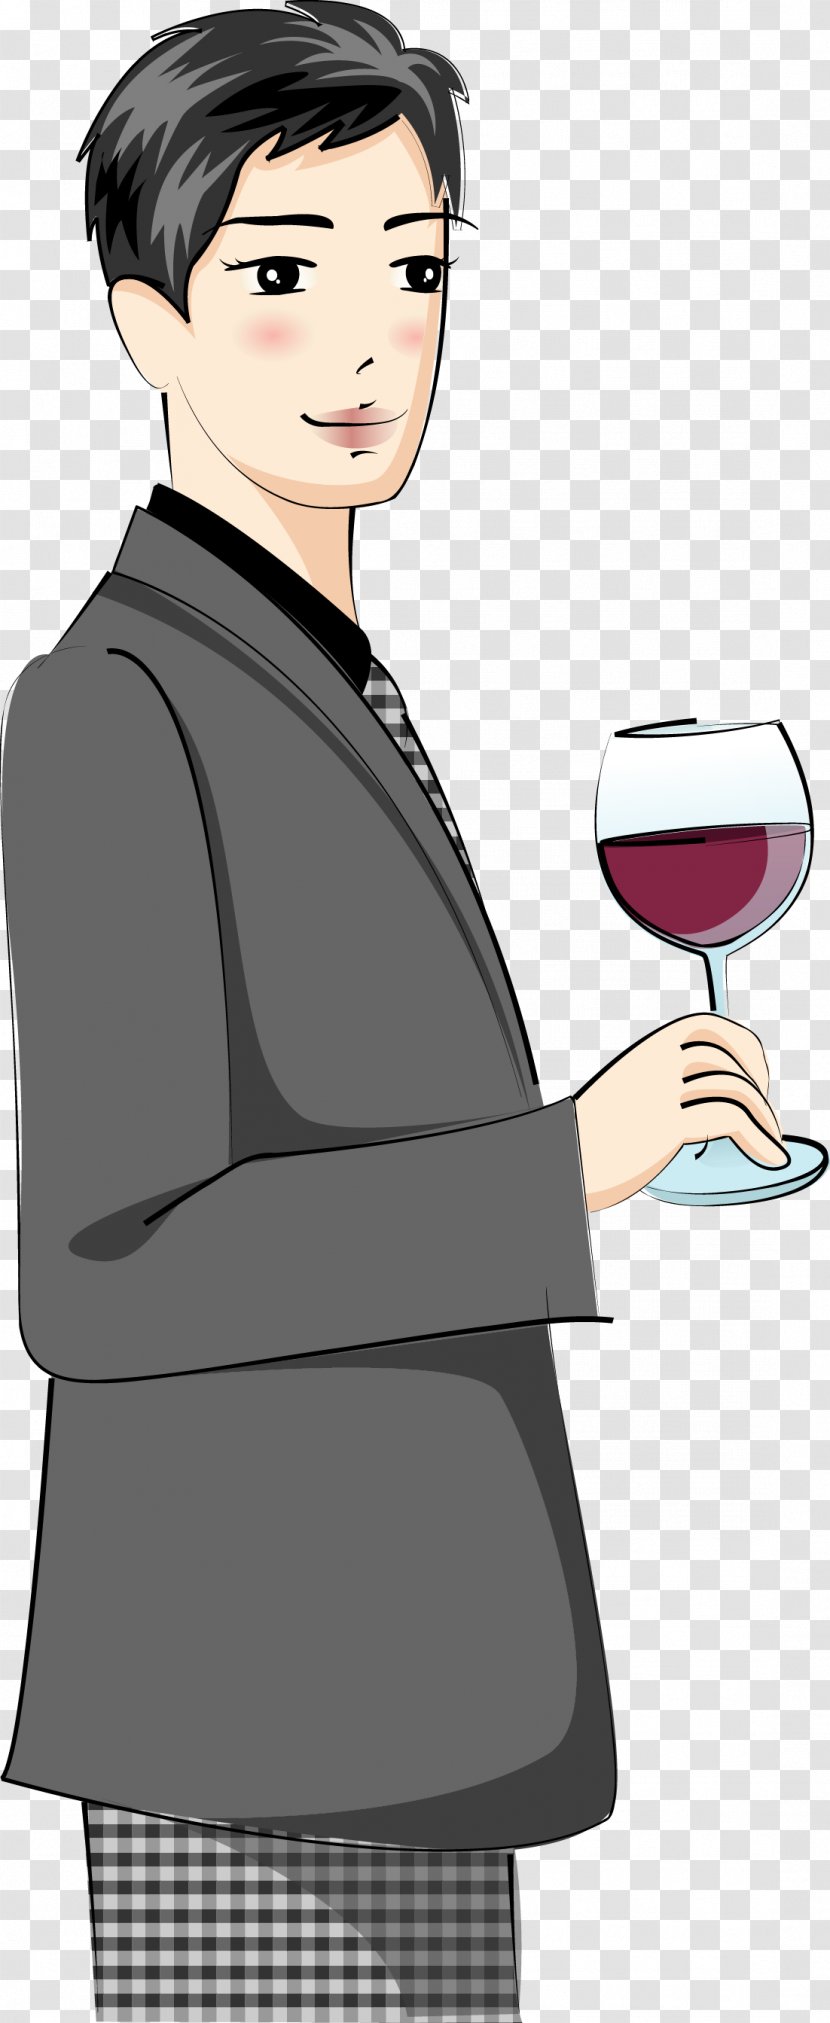 Red Wine Banquet Investor Investment - Frame - Fashion Business Man Transparent PNG